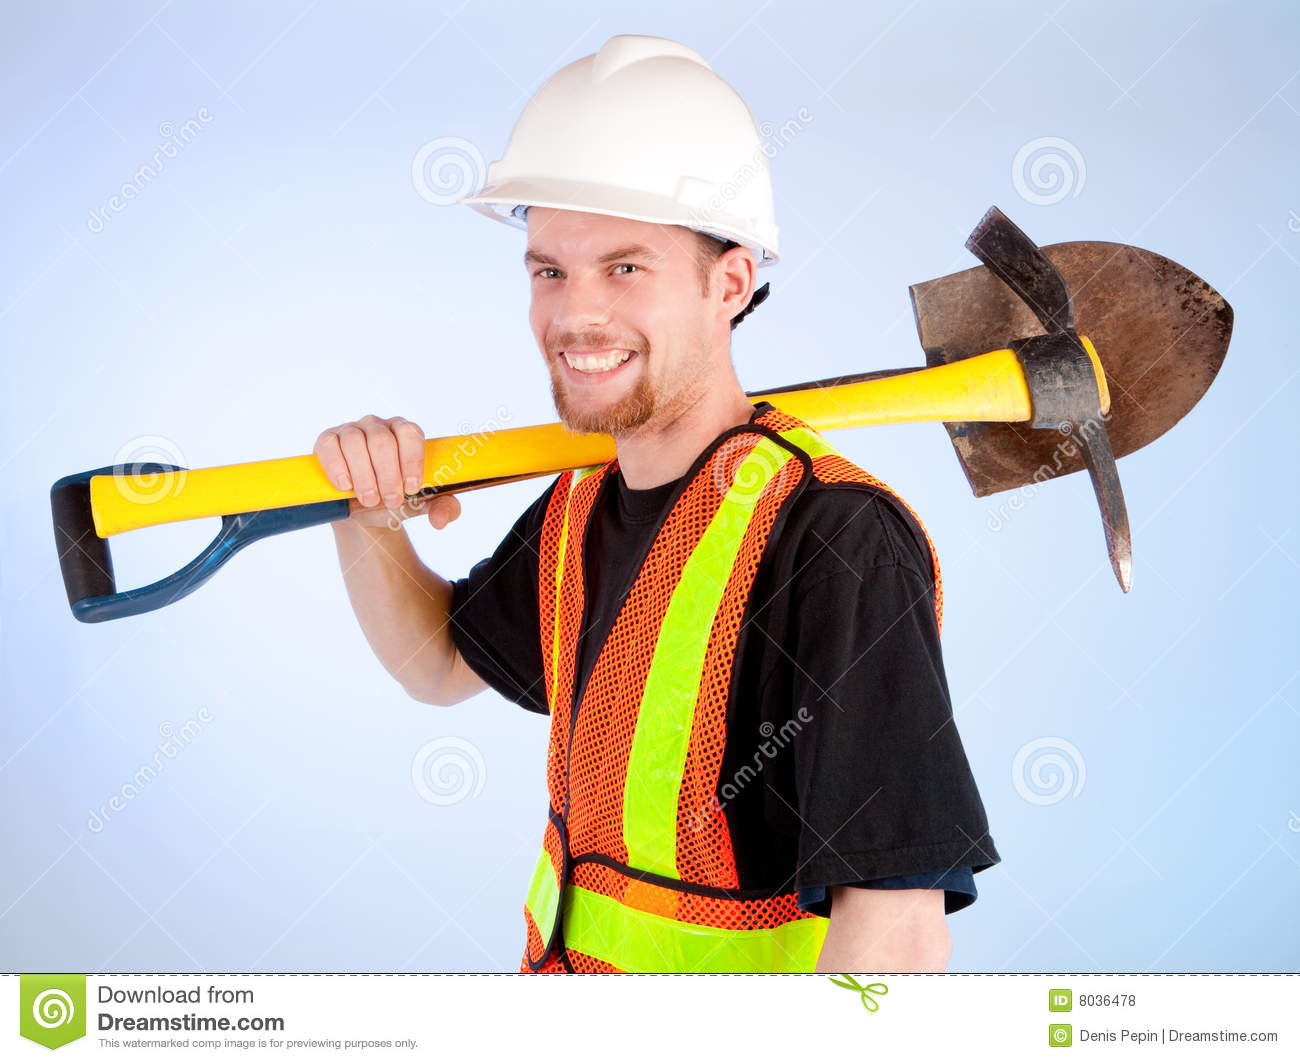 Happy Construction Worker Royalty Free Stock Photos   Image  8036478